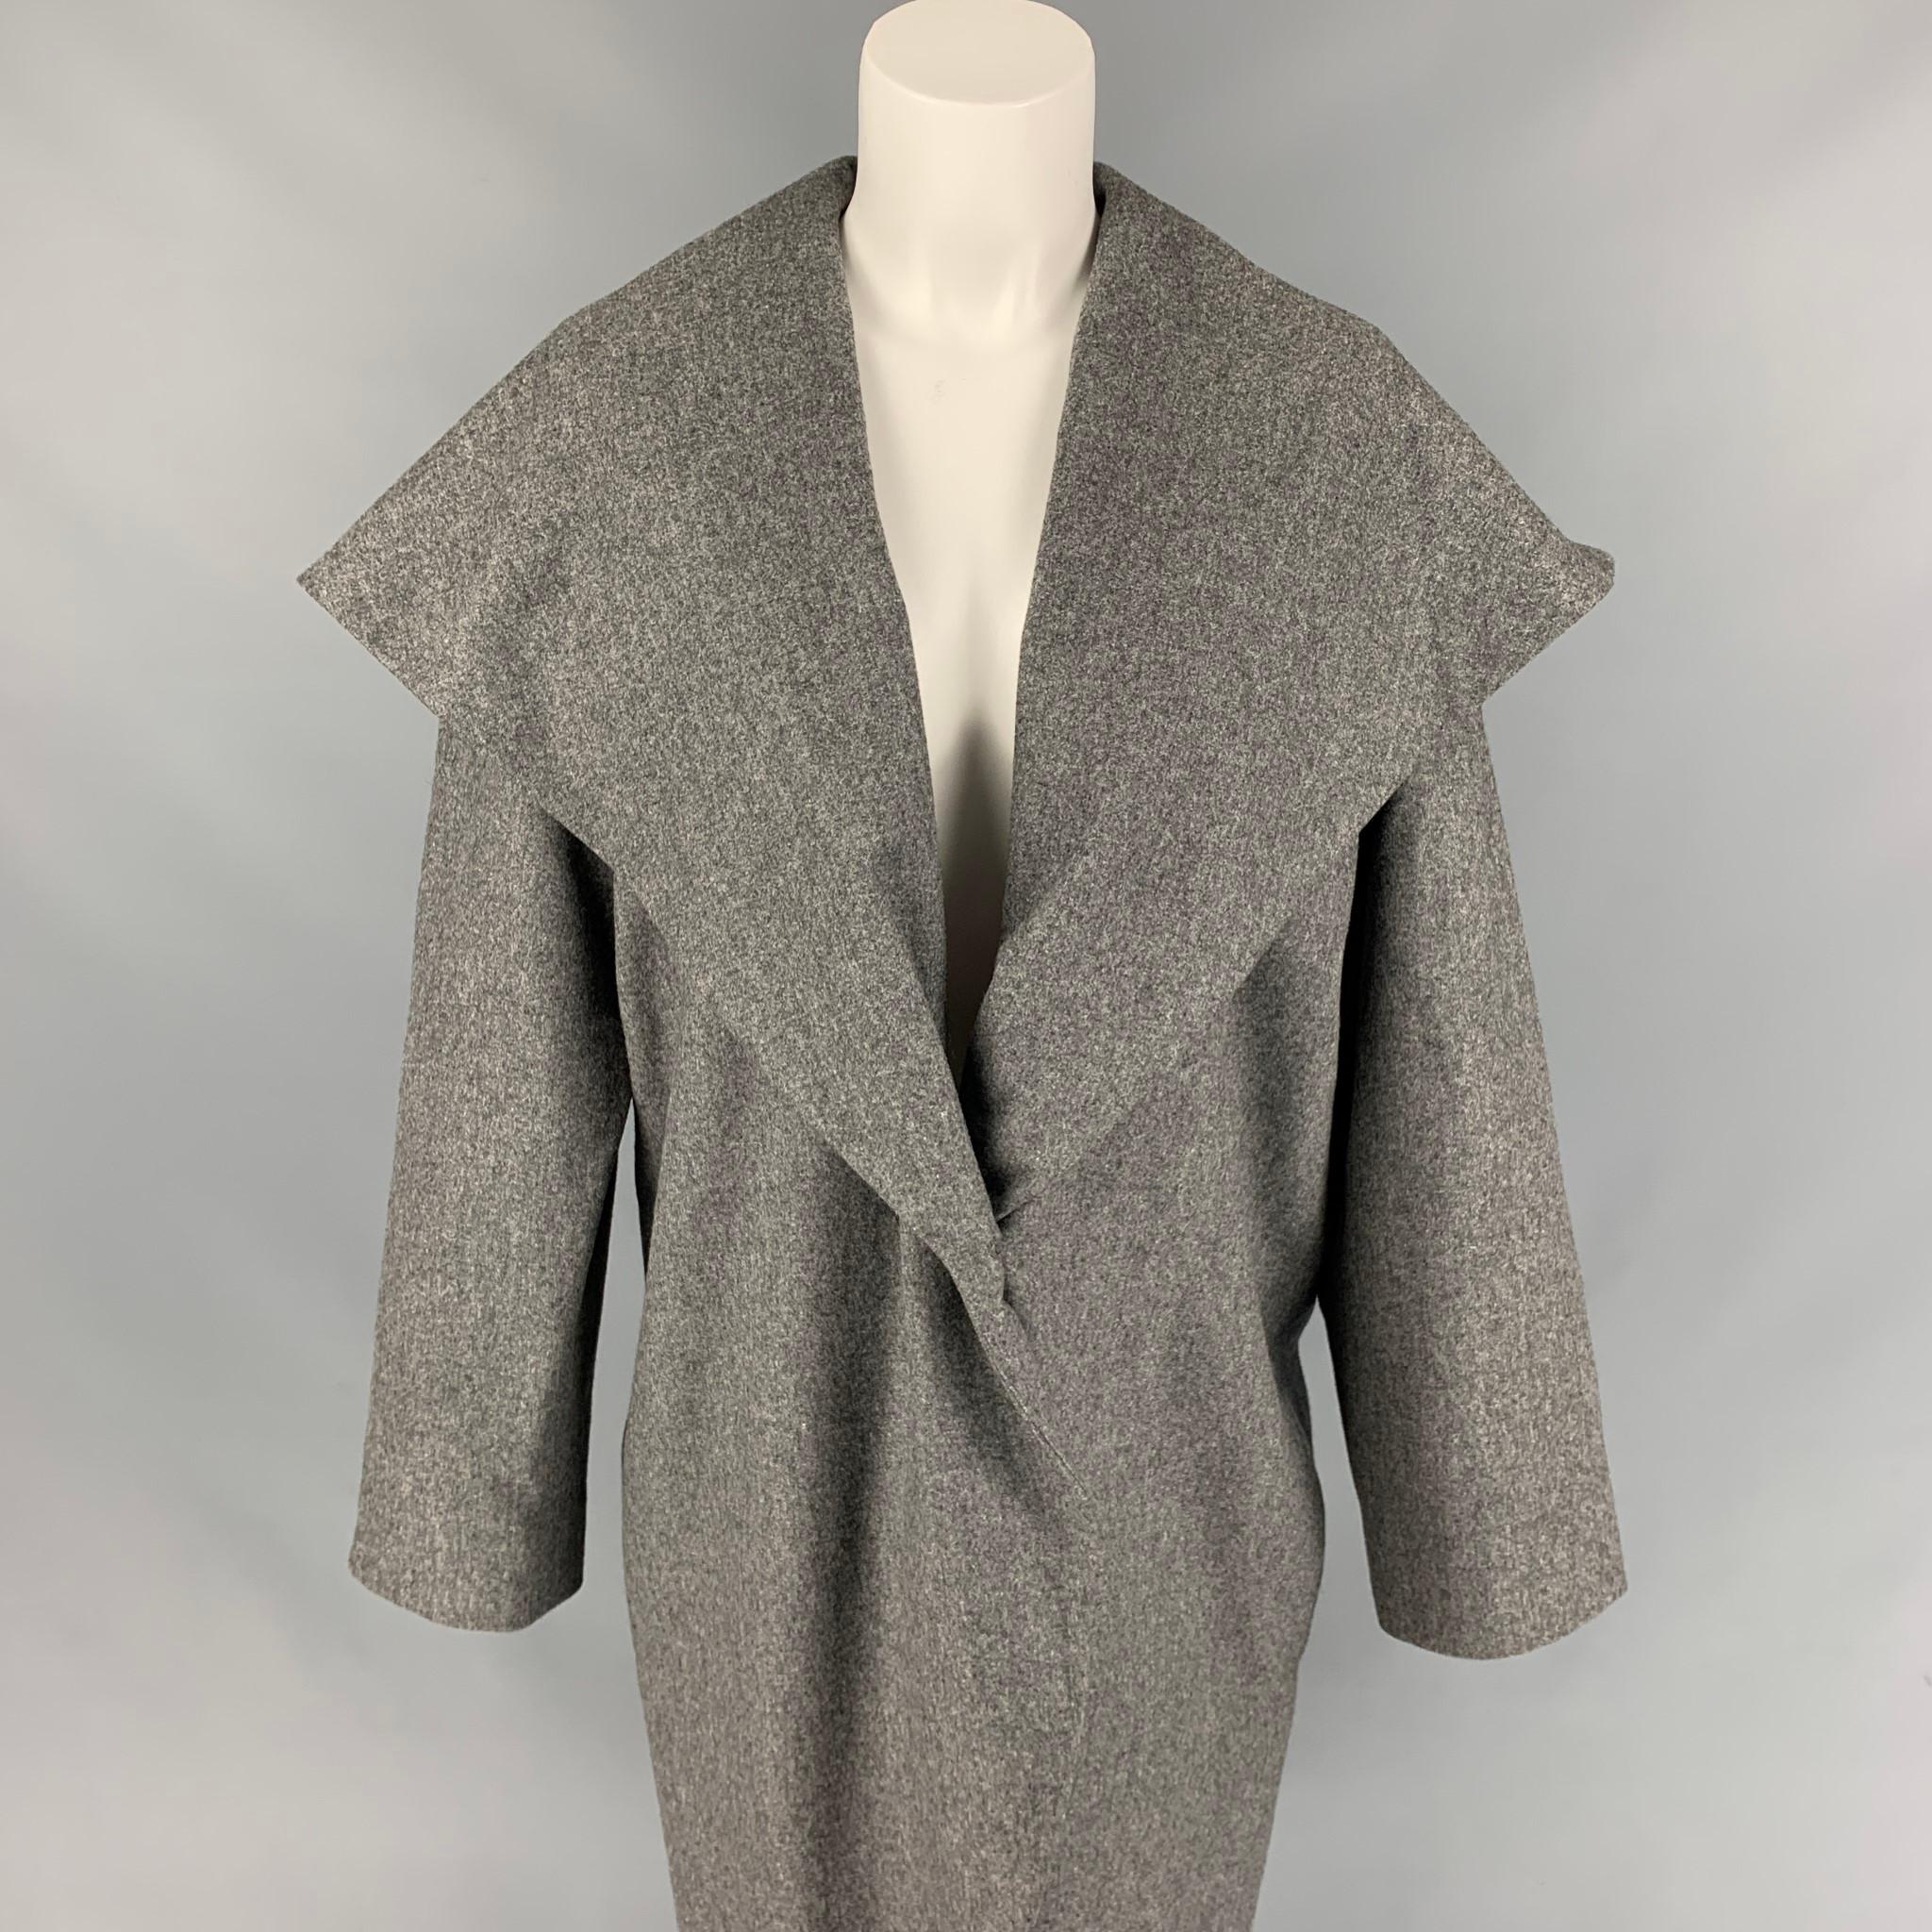 BLACK FLEECE coat comes in a grey heather material featuring a large shawl collar, slit pockets, and a buttoned closure. 

Very Good Pre-Owned Condition.
Marked: BB2

Measurements:

Shoulder: 15 in.
Bust: 44 in.
Sleeve: 24 in.
Length: 41 in. 